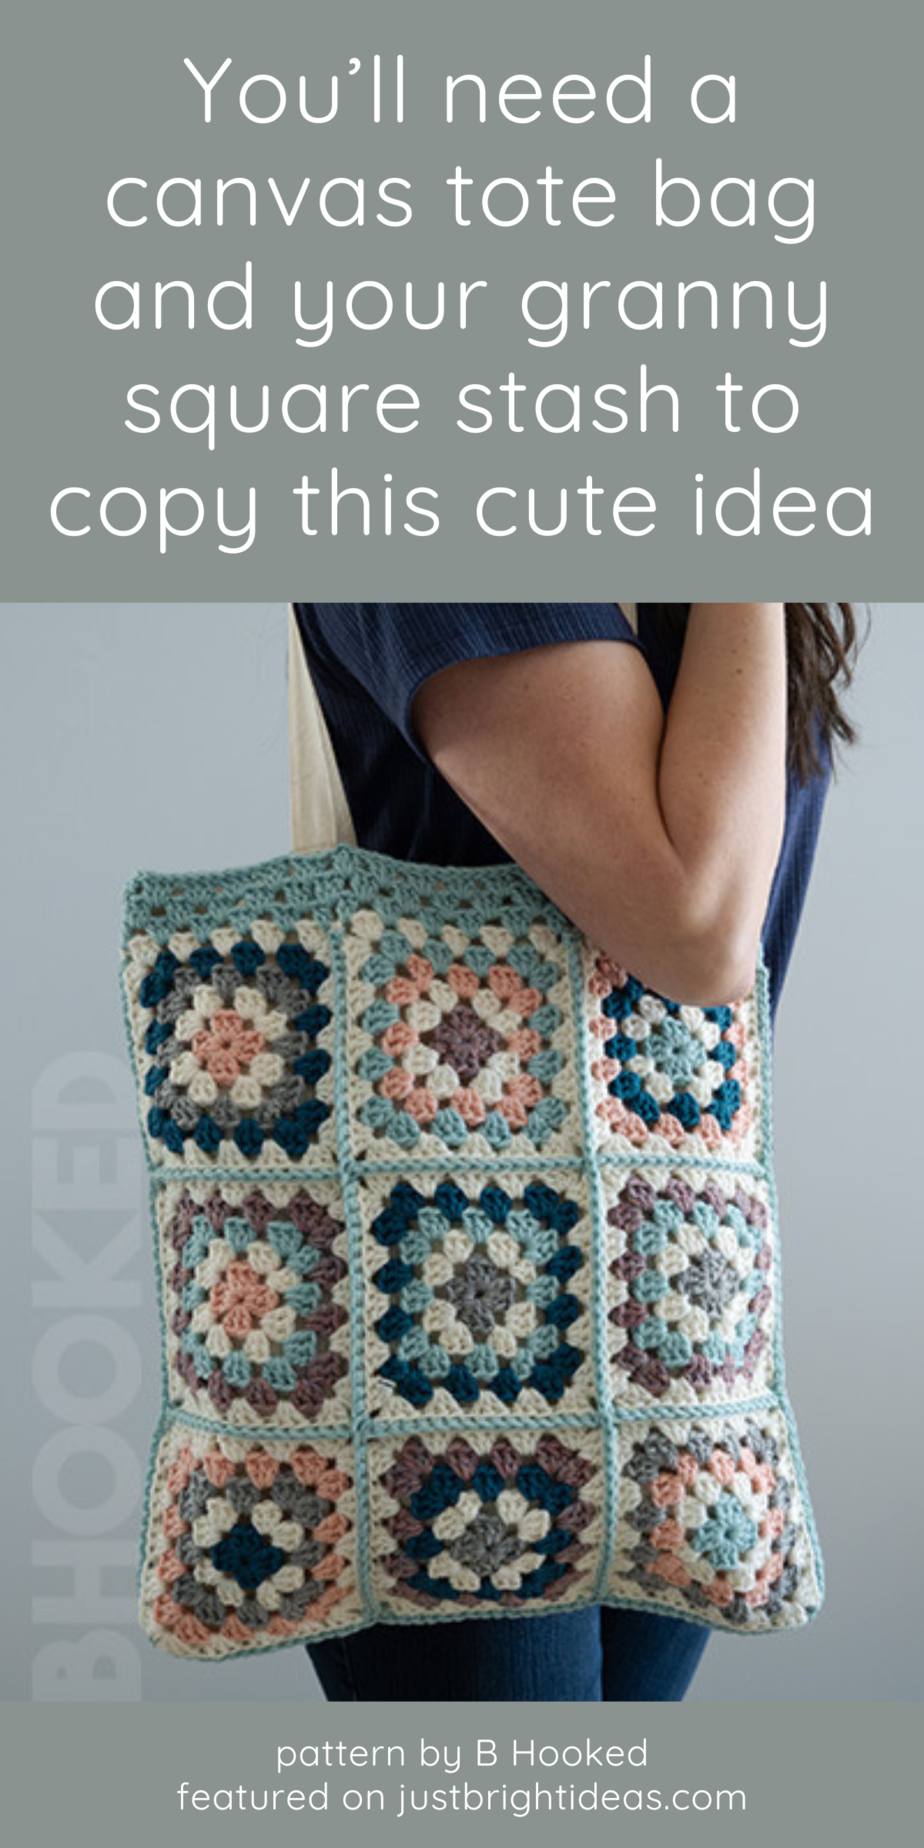 ✨ Ready to transform your granny squares into something fabulous? 🧶🌸 Check out this fabulous project: combining colorful granny squares with a canvas tote for the cutest DIY bag ever! Perfect for all your summer adventures. 👜💖